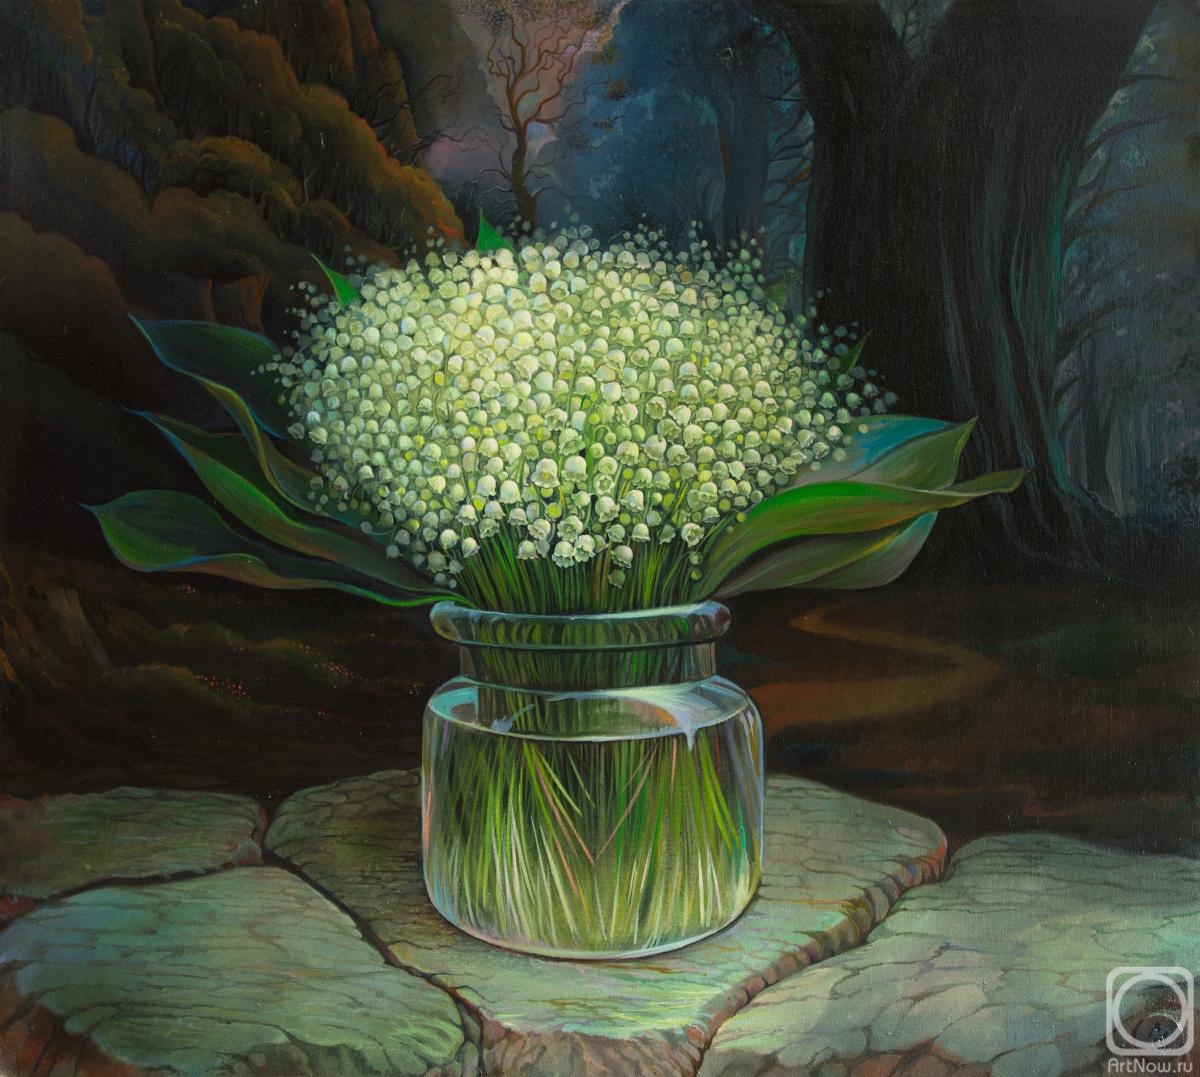 Sergeev Sergey. Lilies of the valley for Cinderella